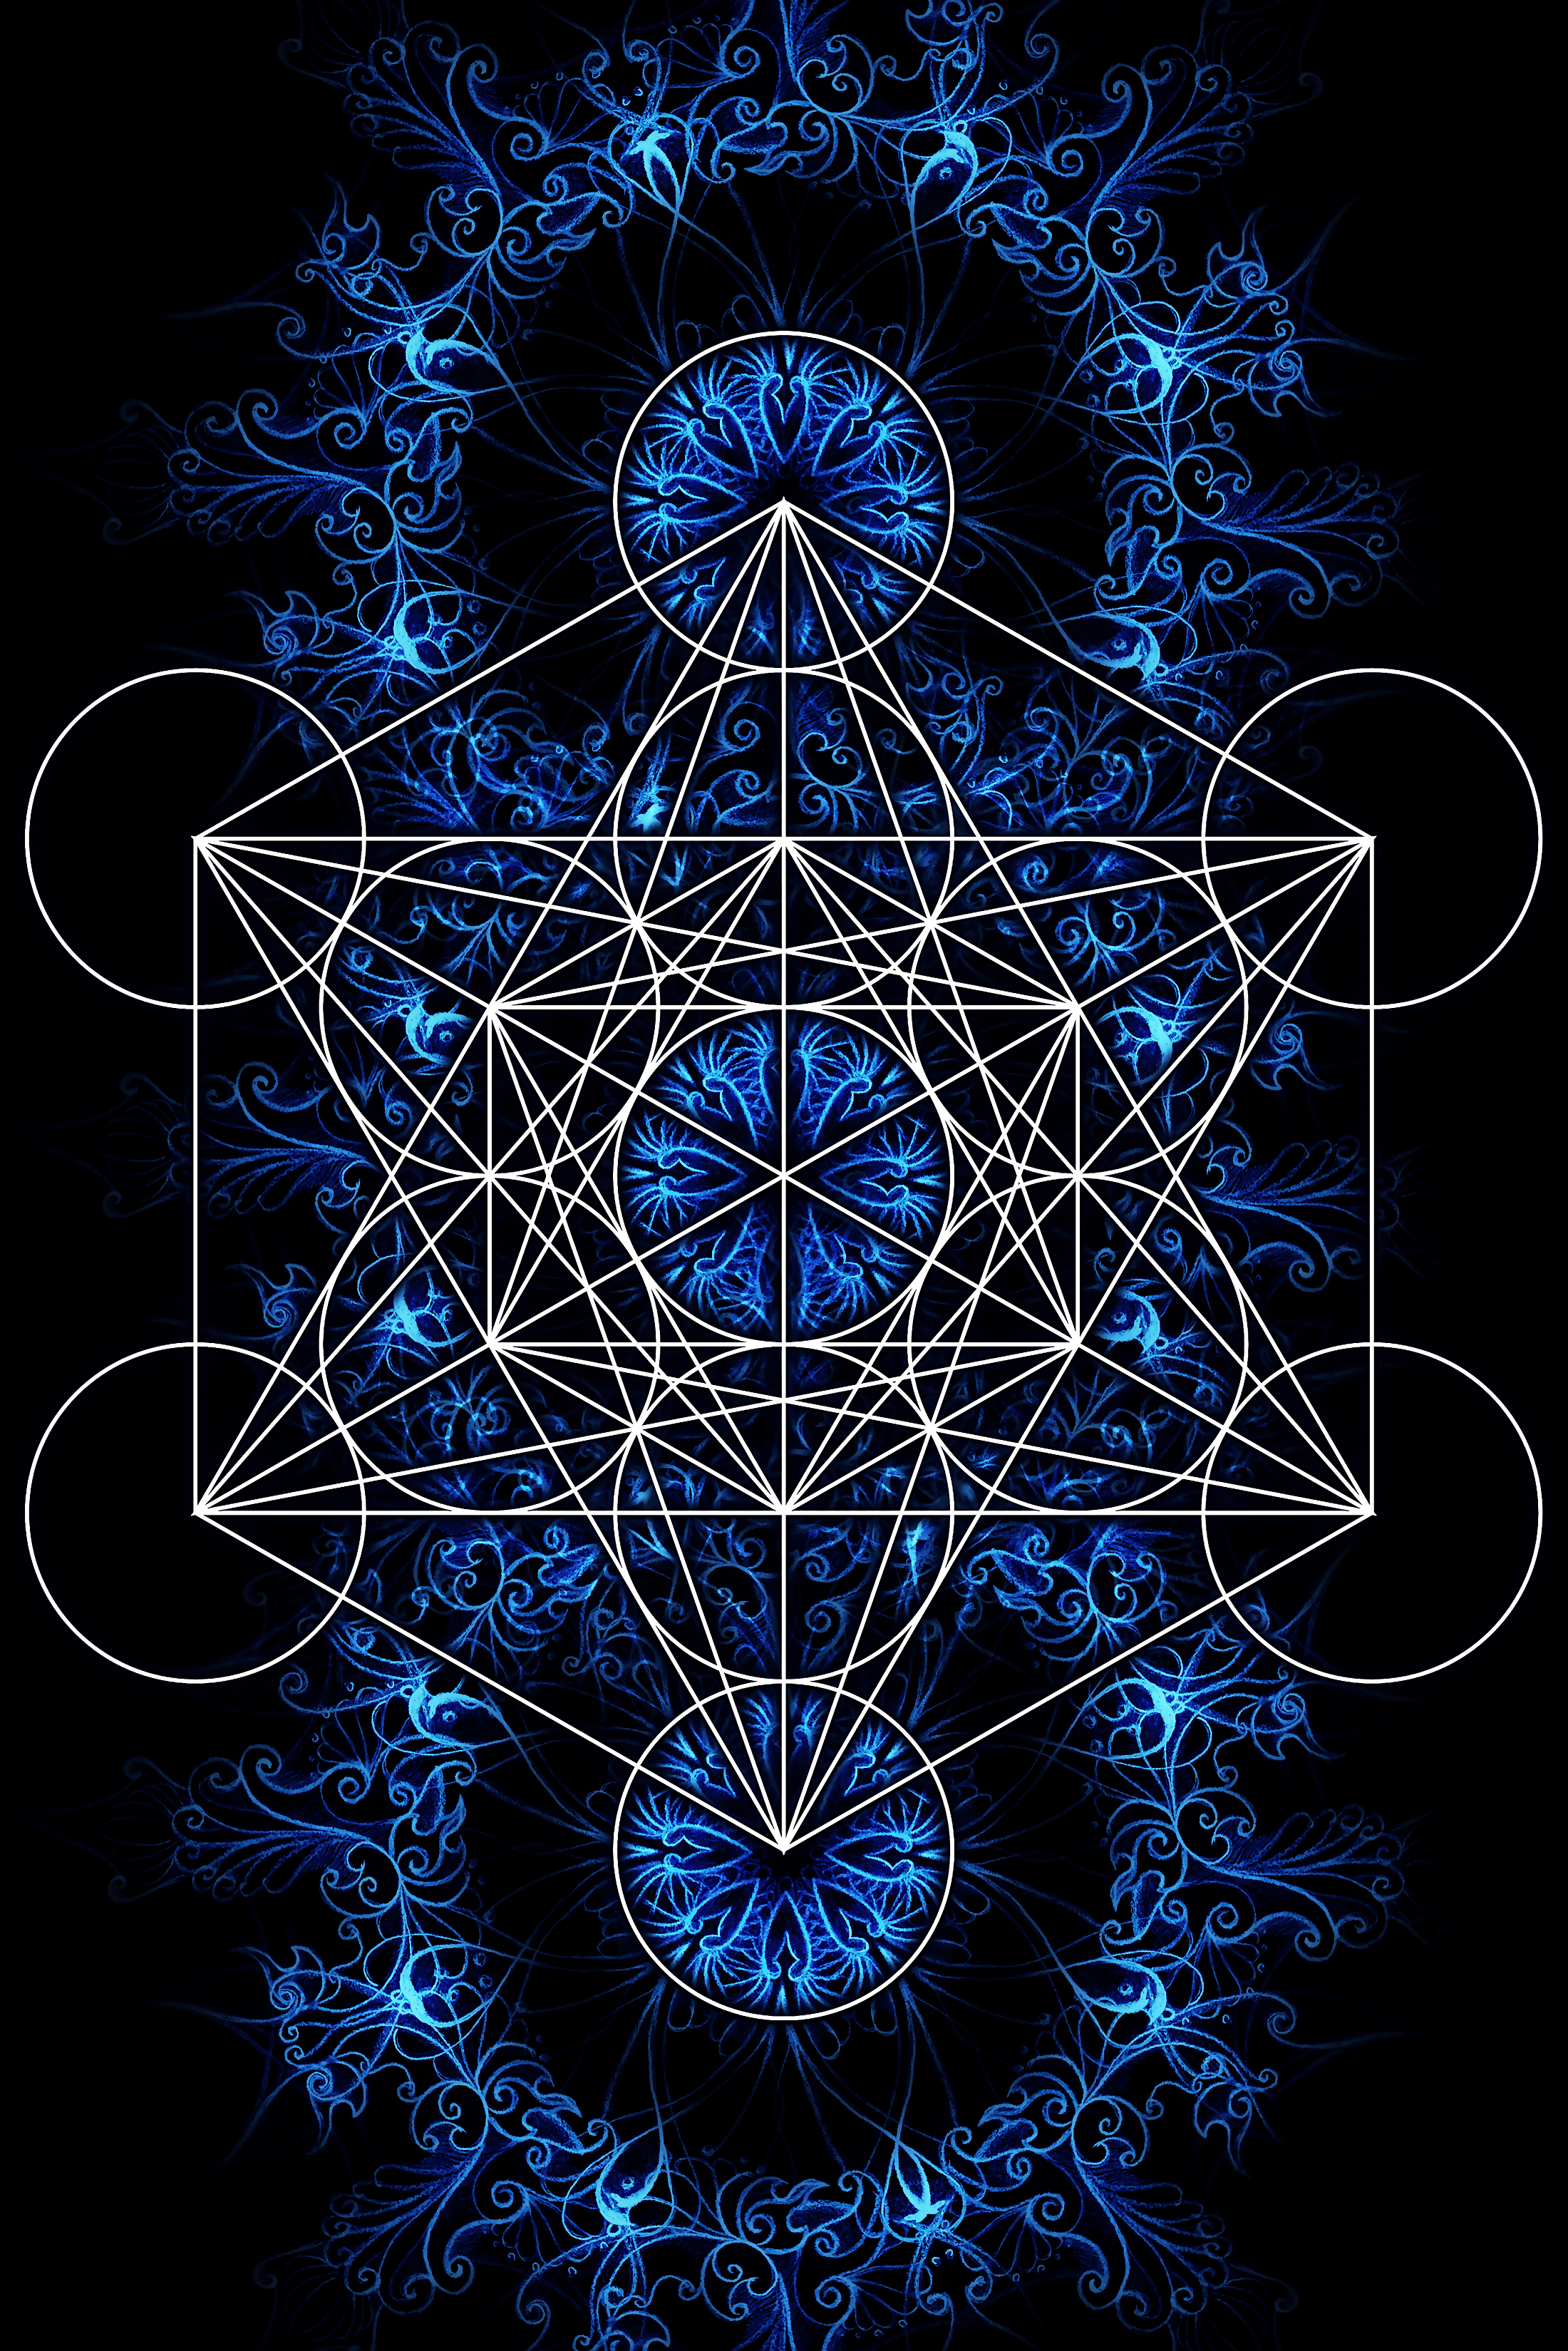 Merkaba Star Meaning, Origin And Importance In Sacred Geometry